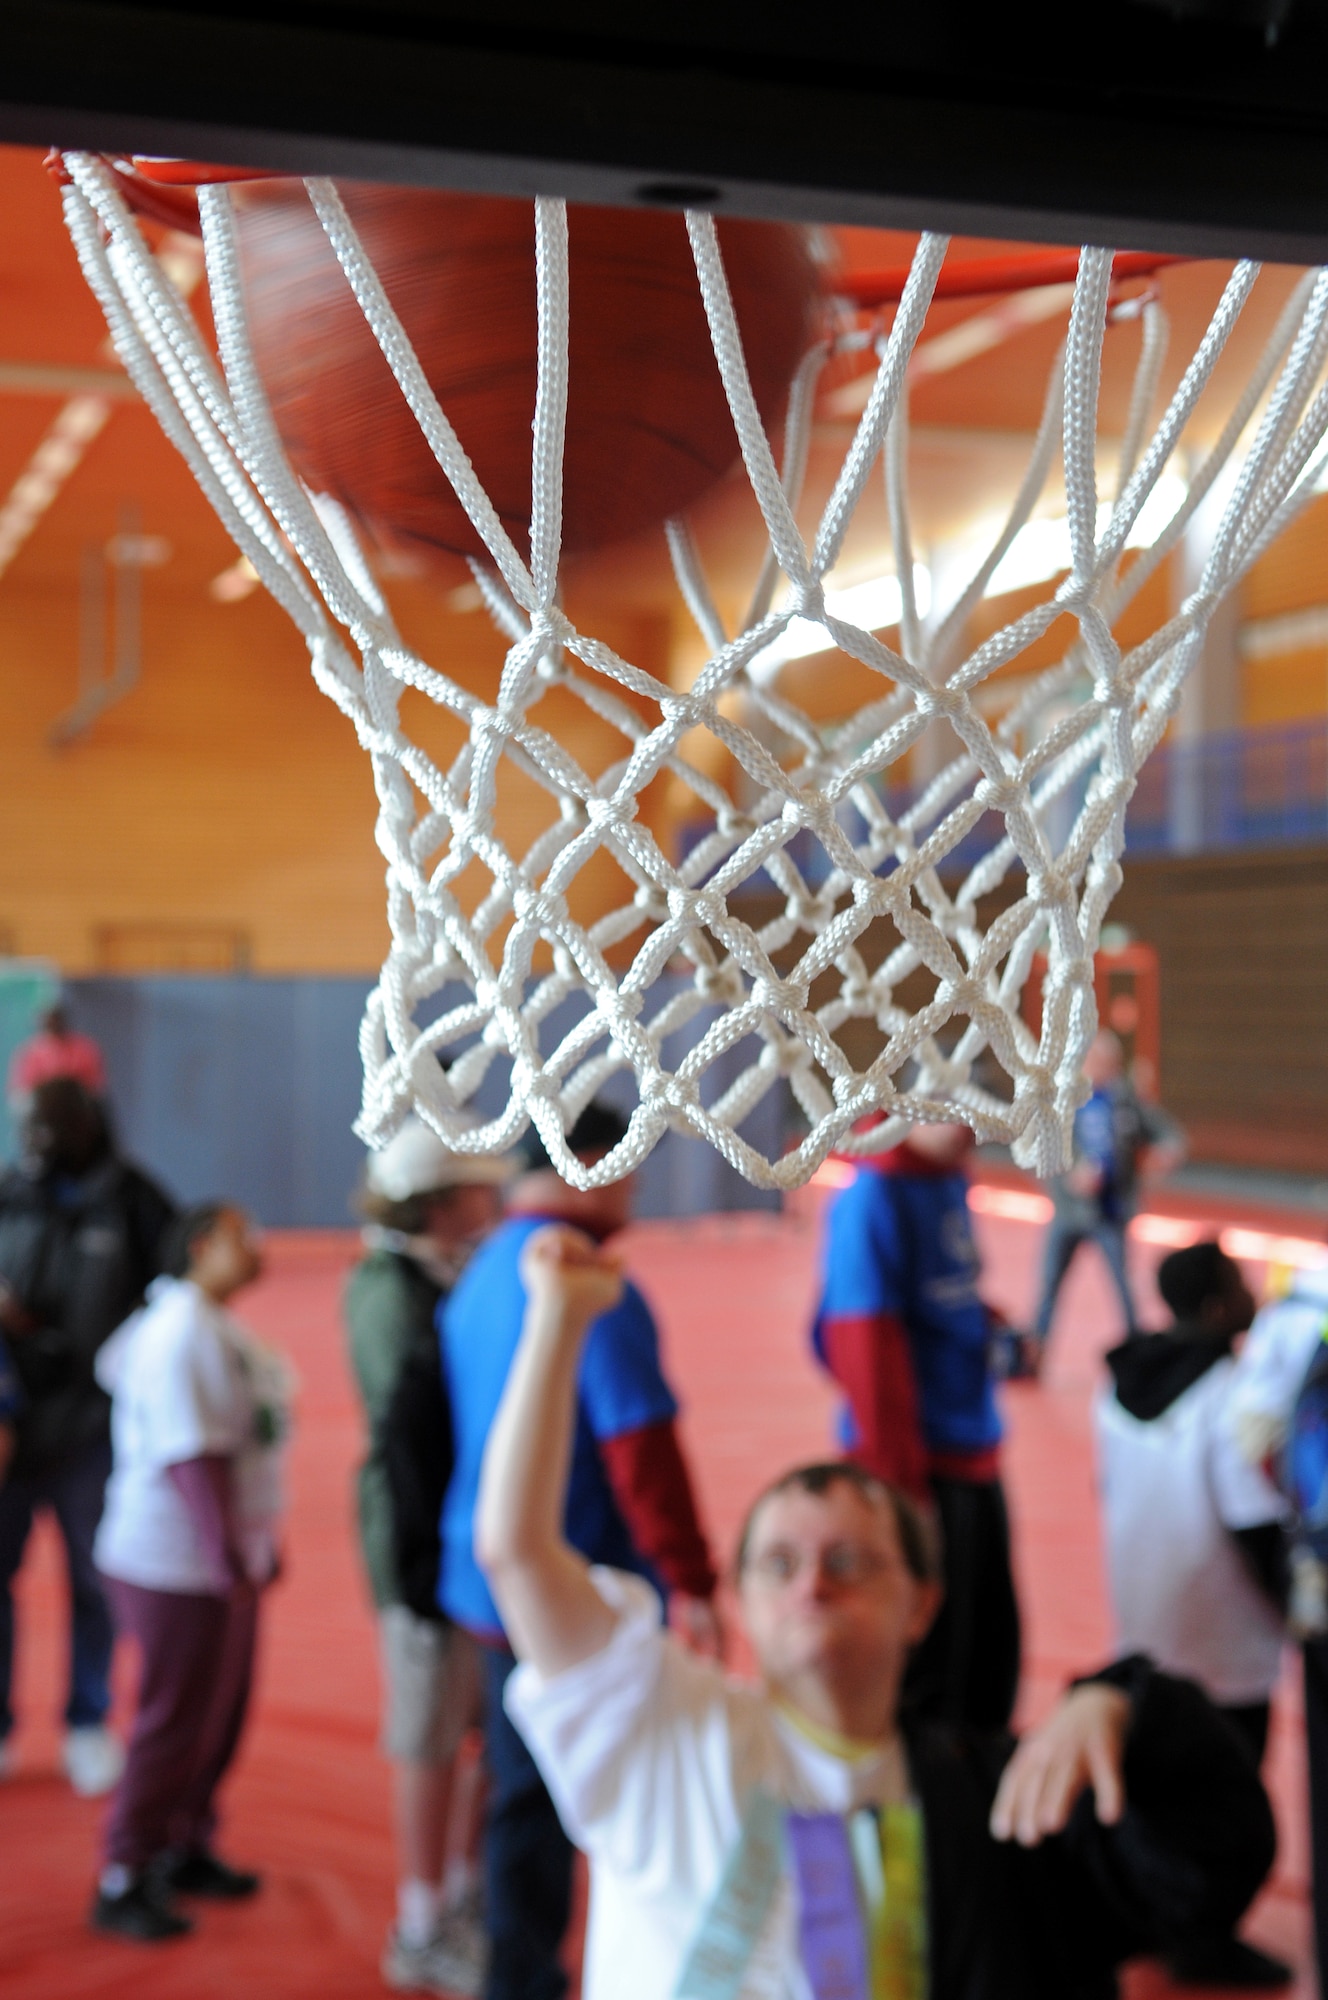 A German local national plays a game of basketball during the 36th Annual Special Olympics held in Enkenbach-Alsenborn, Germany, May 6, 2009. Special Olympics is an international program of year-round sports training and athletic competition for more than 1.7 million children and adults with disabilities in more than 150 countries including Germany. (U.S. Air Force photo by Airman 1st Class Grovert Fuentes-Contreras)(Released)